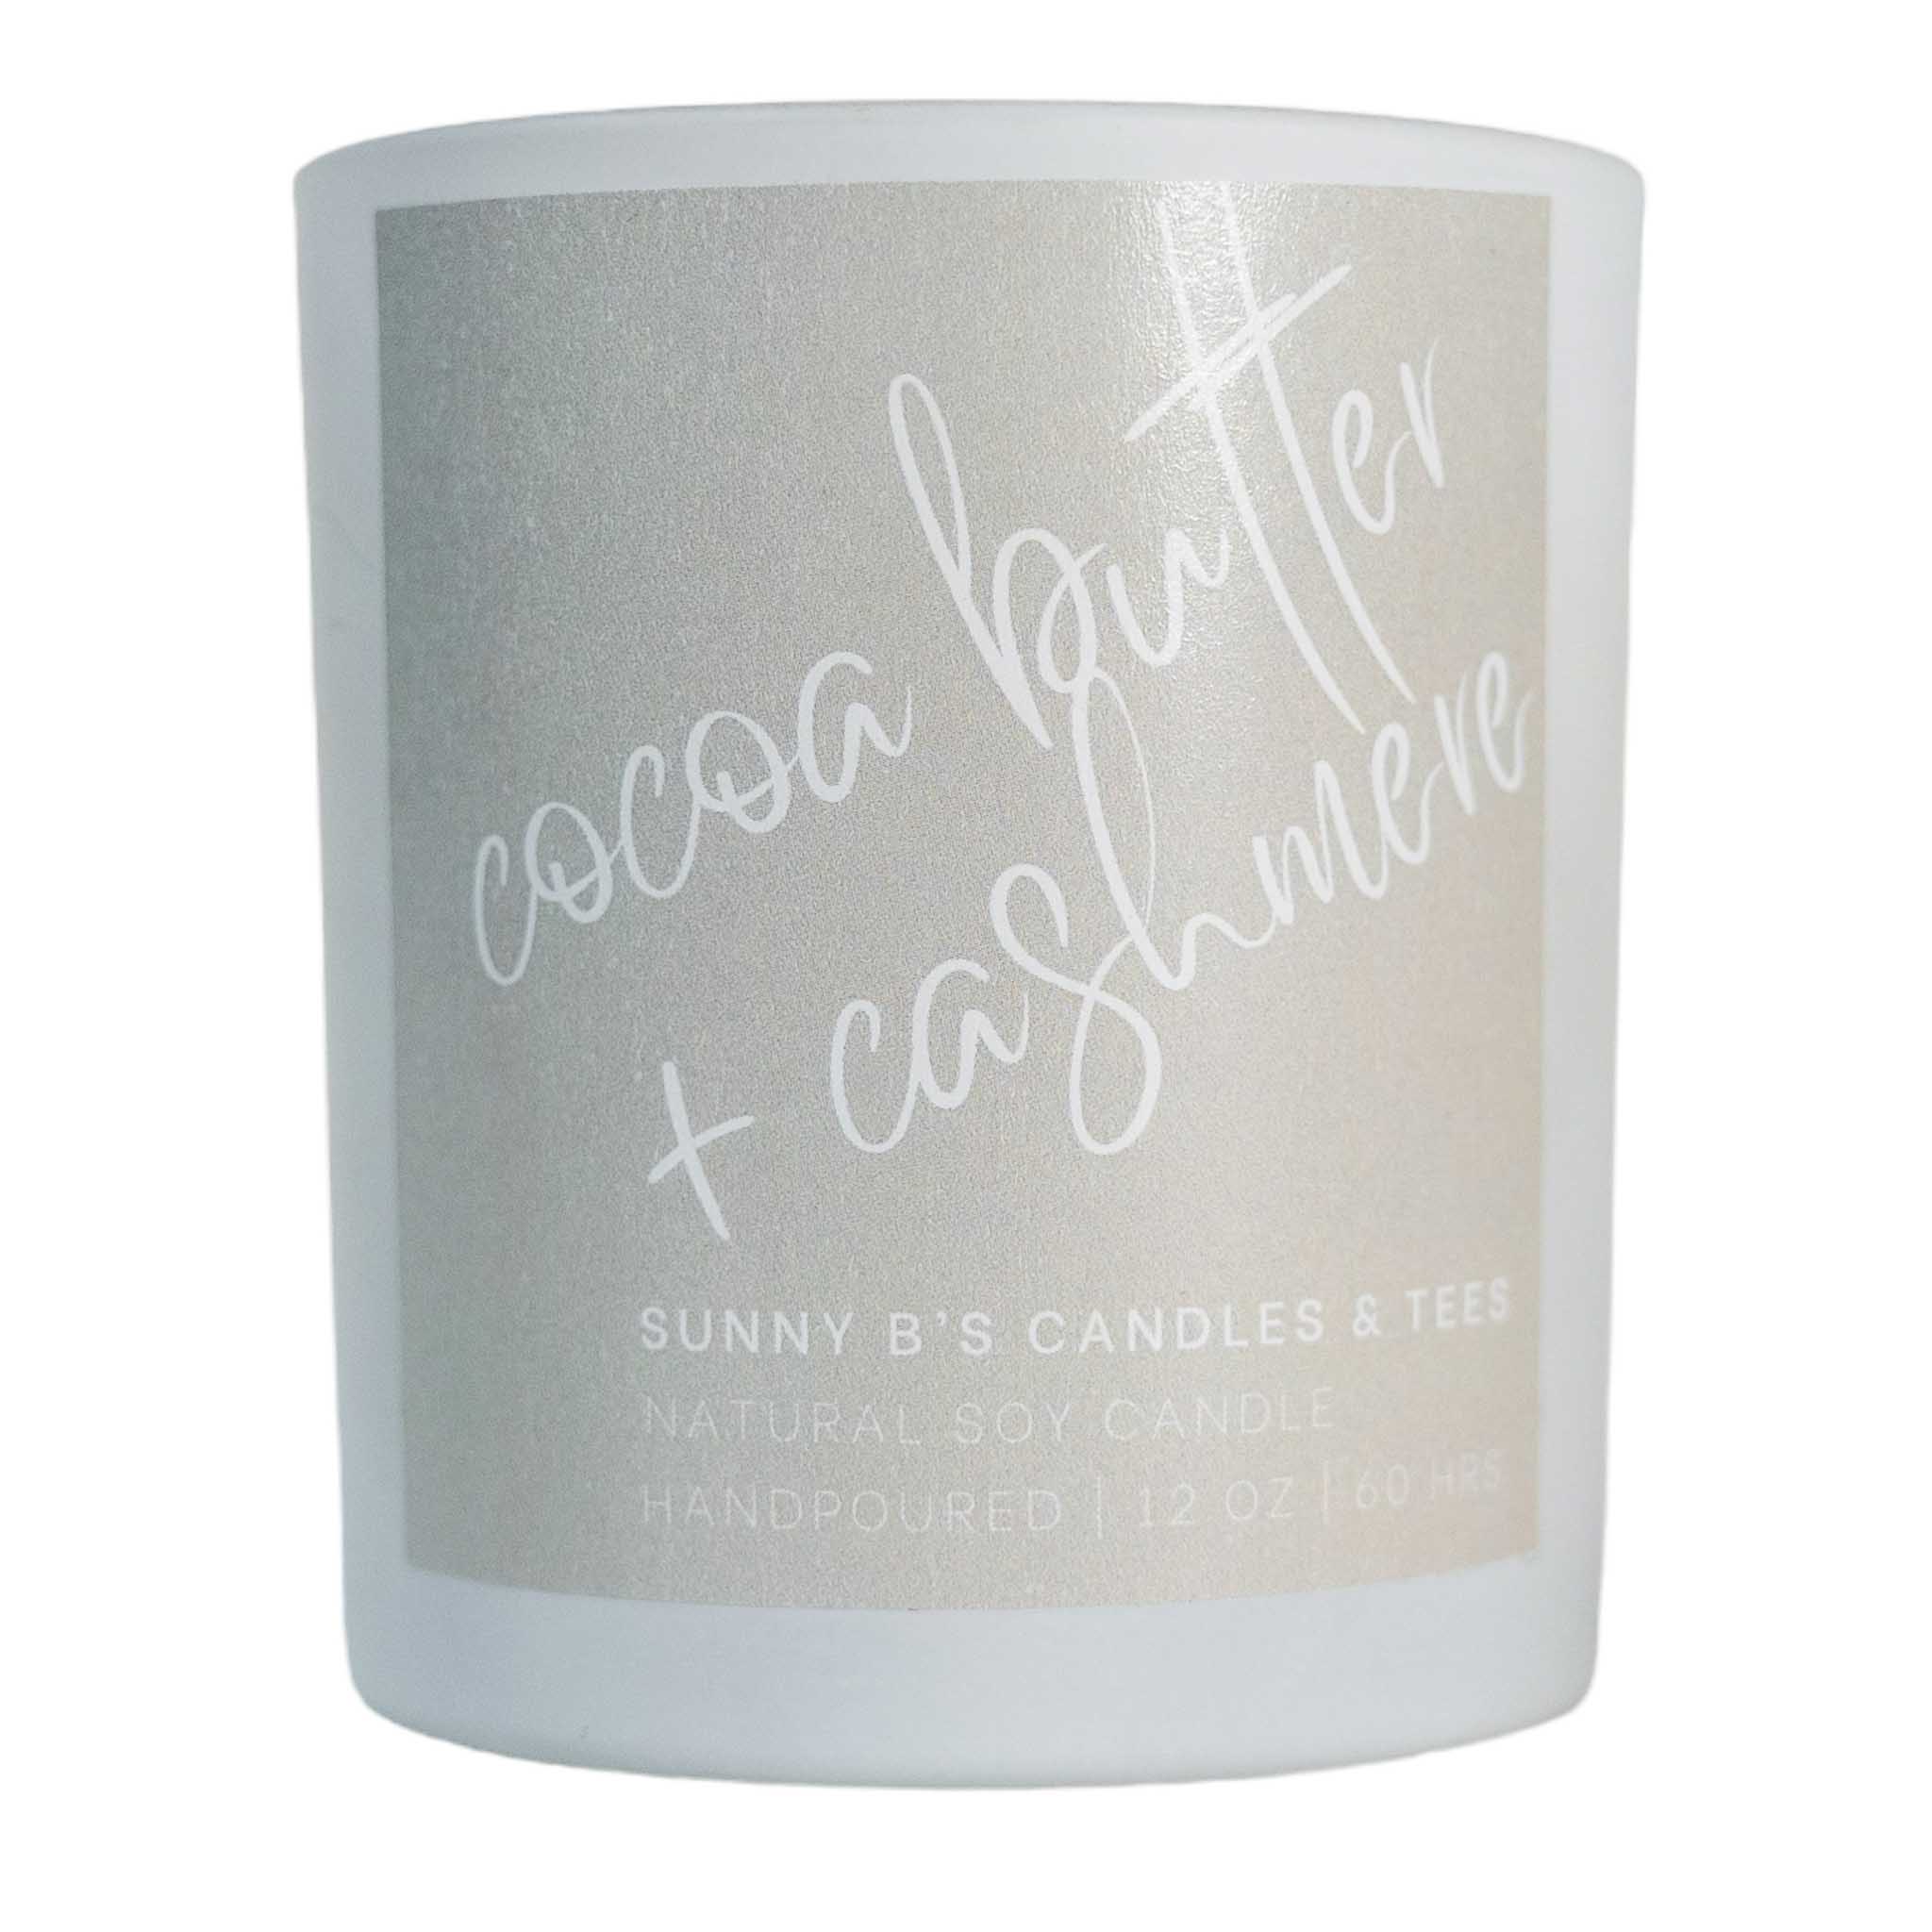 Sunny B's Candle #3 Cocoa Butter & Cashmere